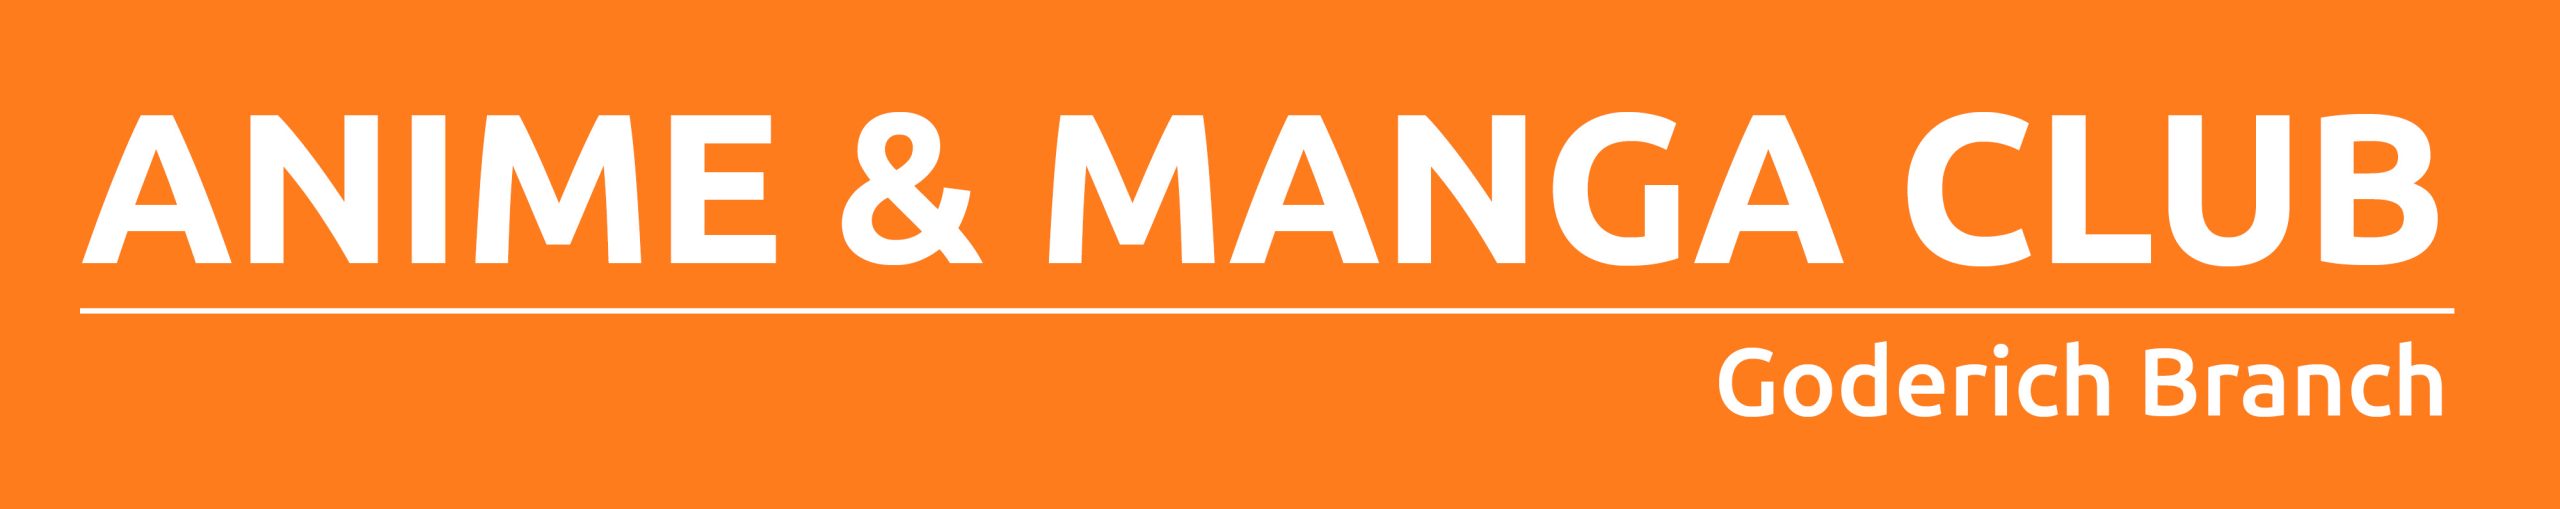 White text on an orange background with text promoting Anime & Manga Club at Goderich Branch